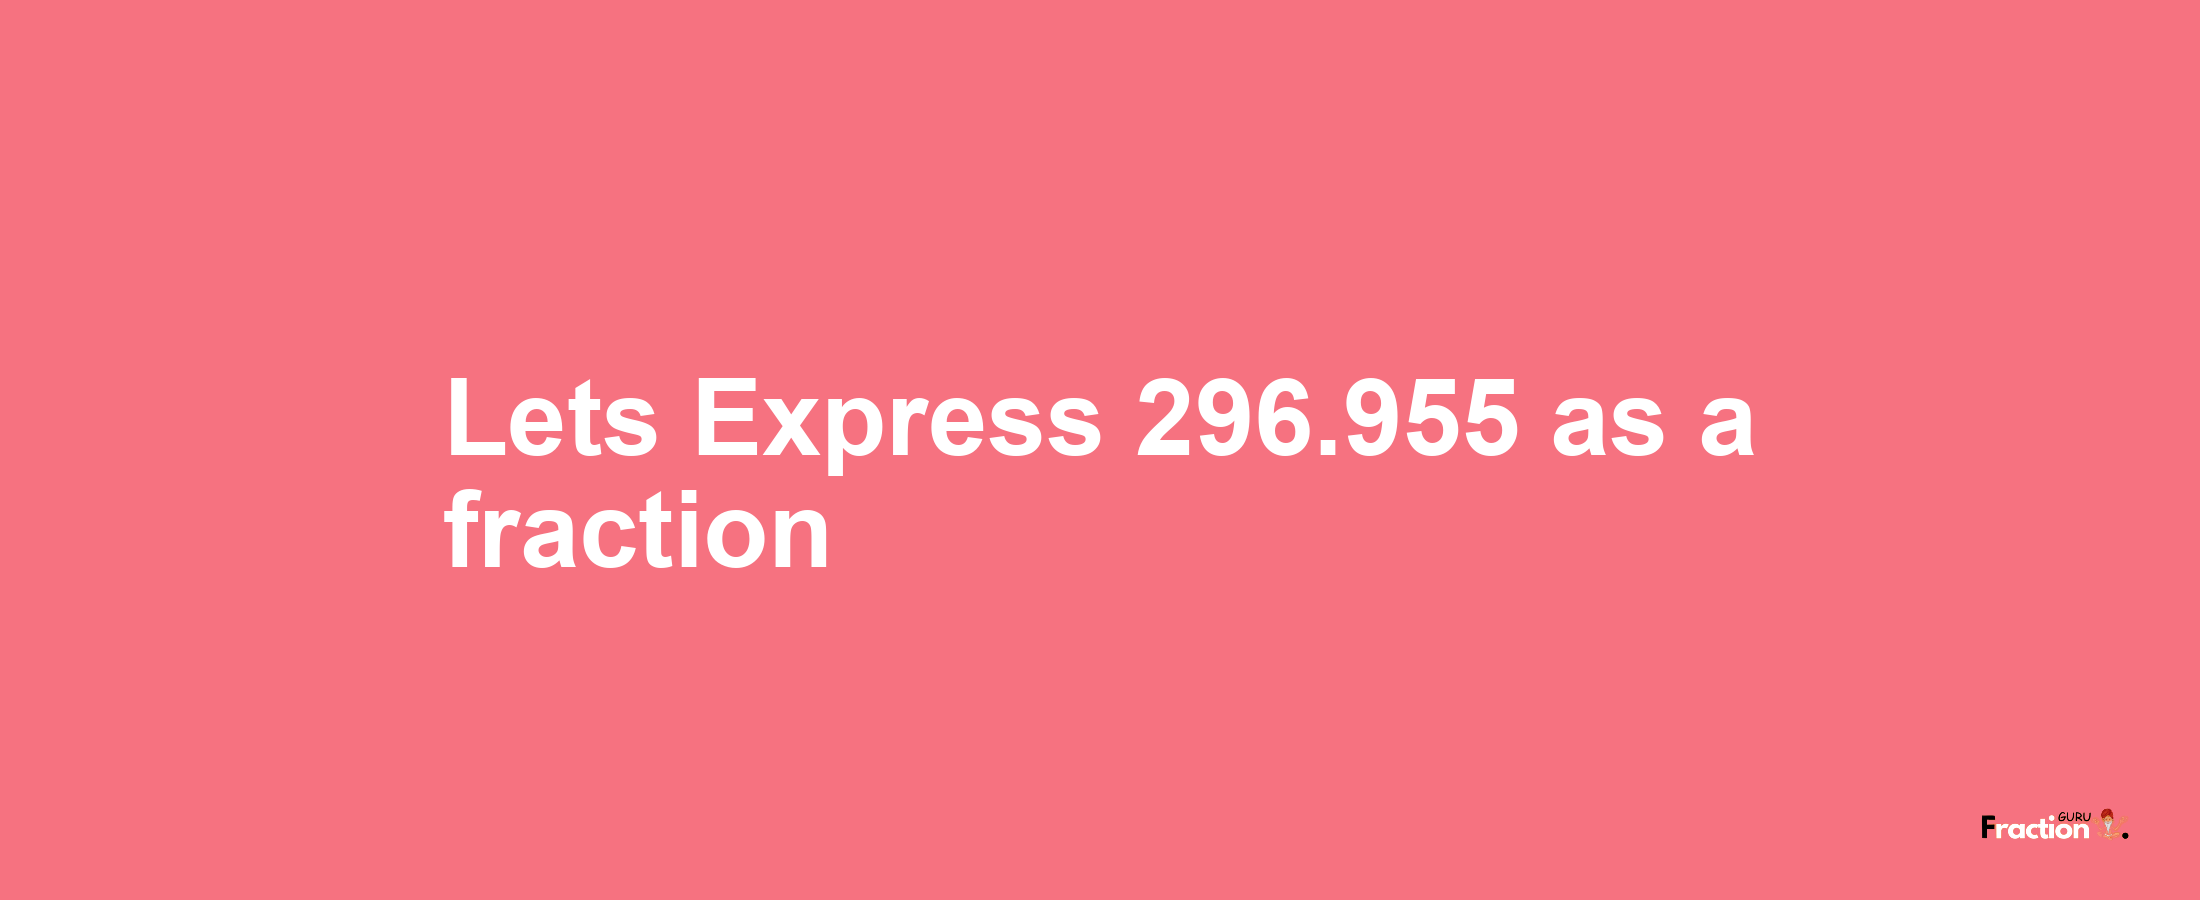 Lets Express 296.955 as afraction